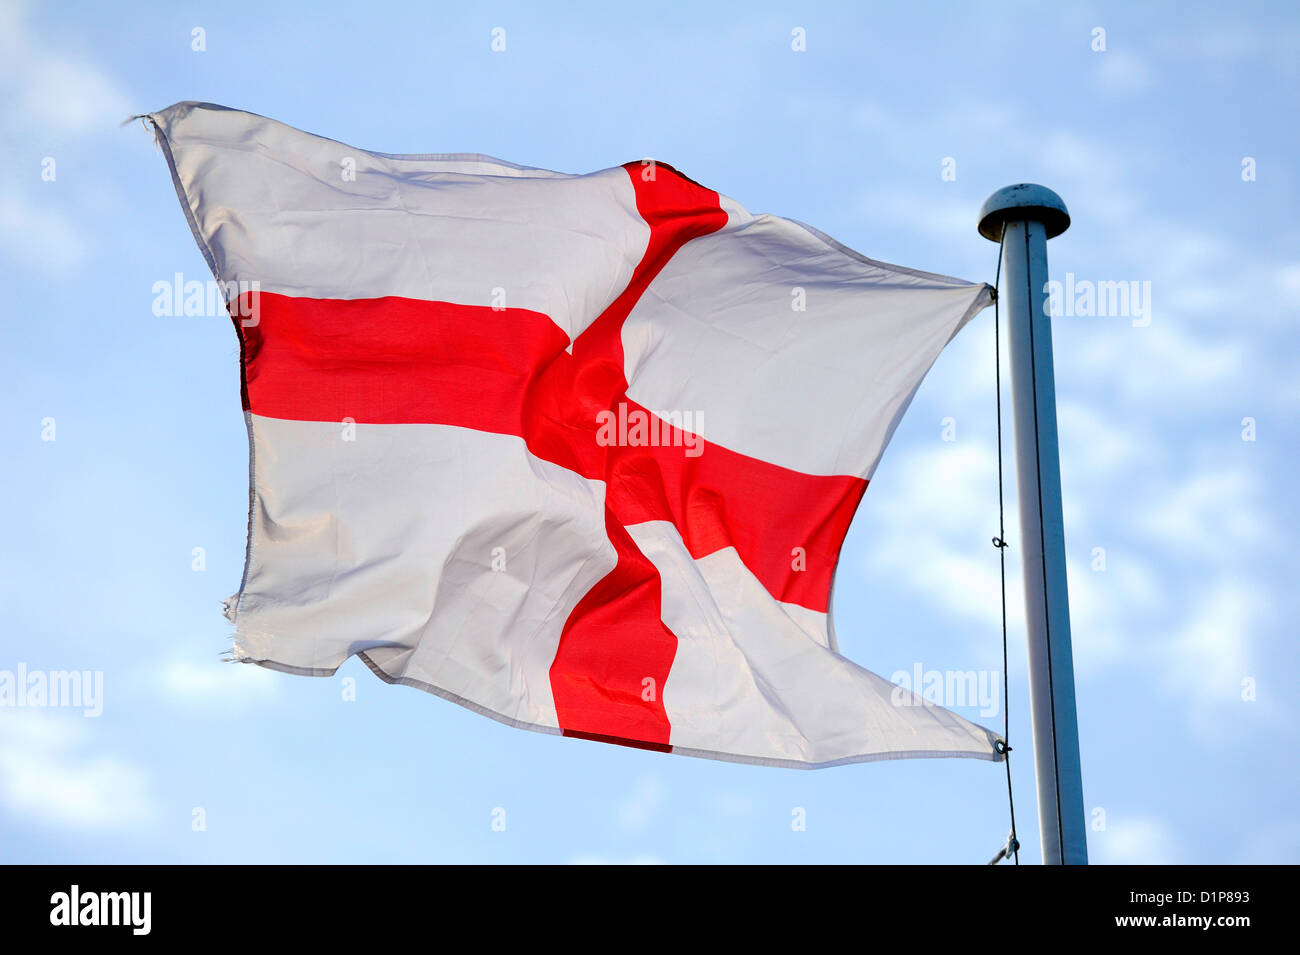 The flag of St. George or England flag. Stock Photo